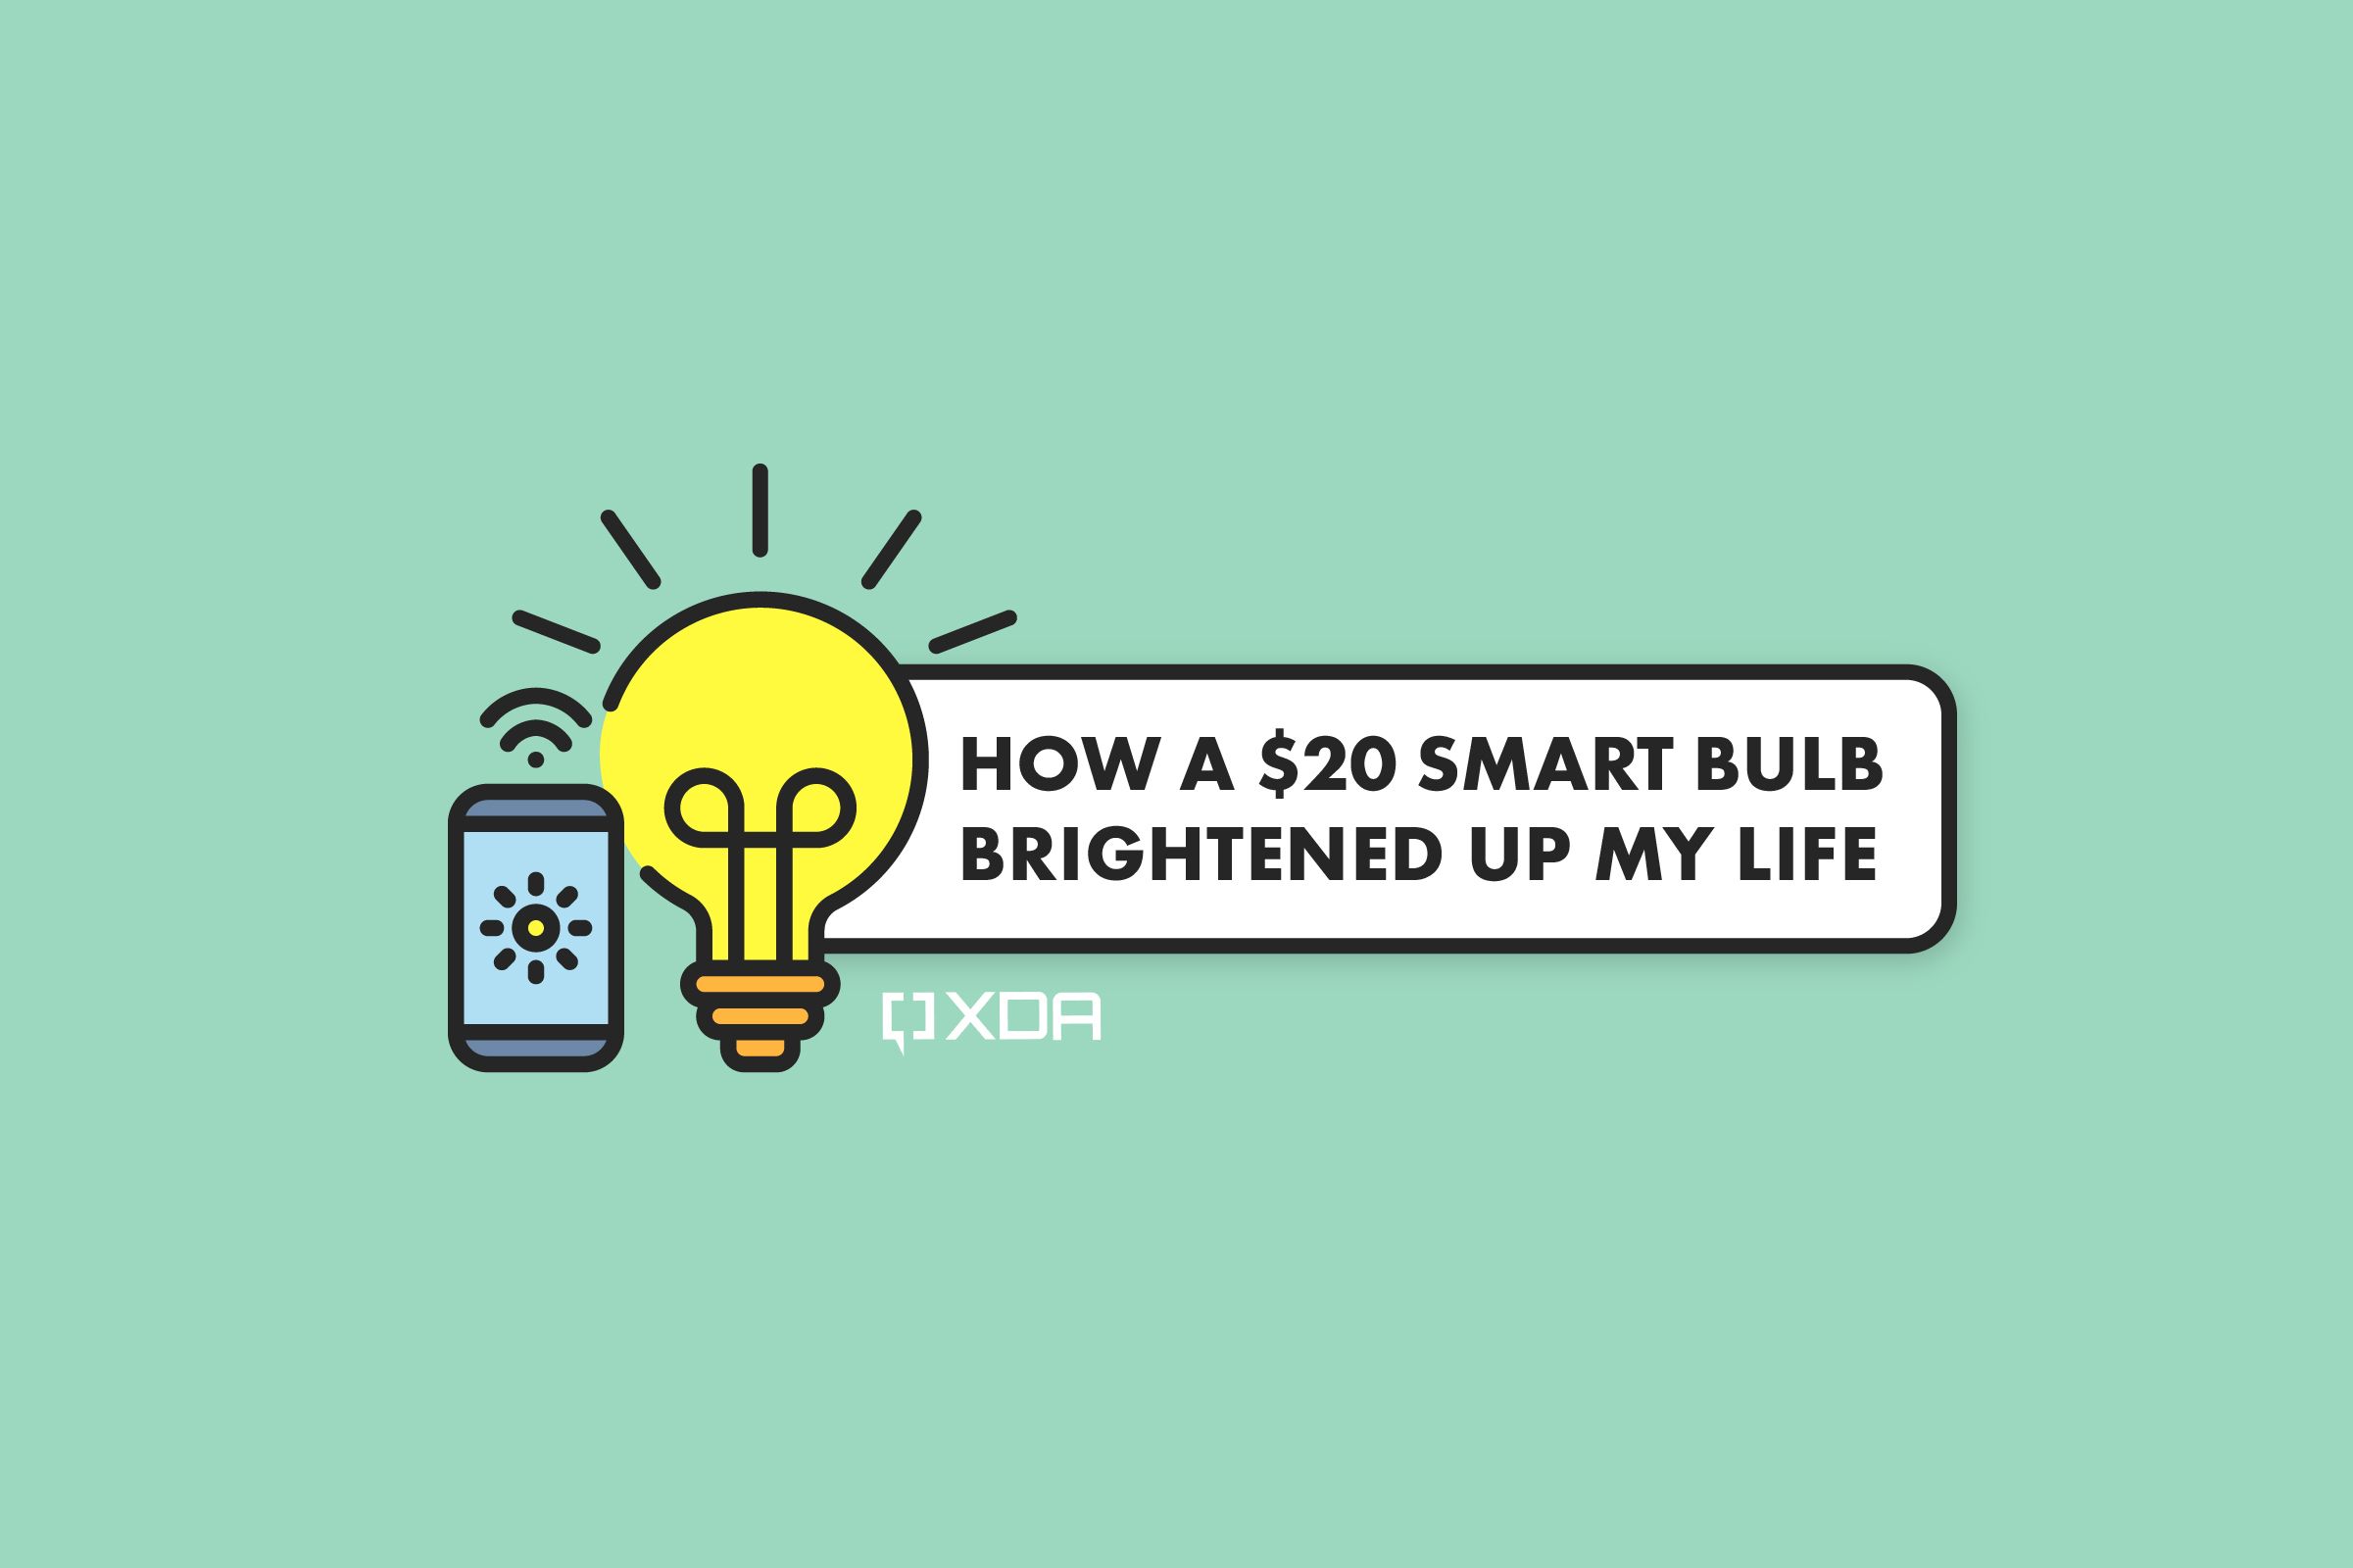 How a $20 smart bulb brightened up my life